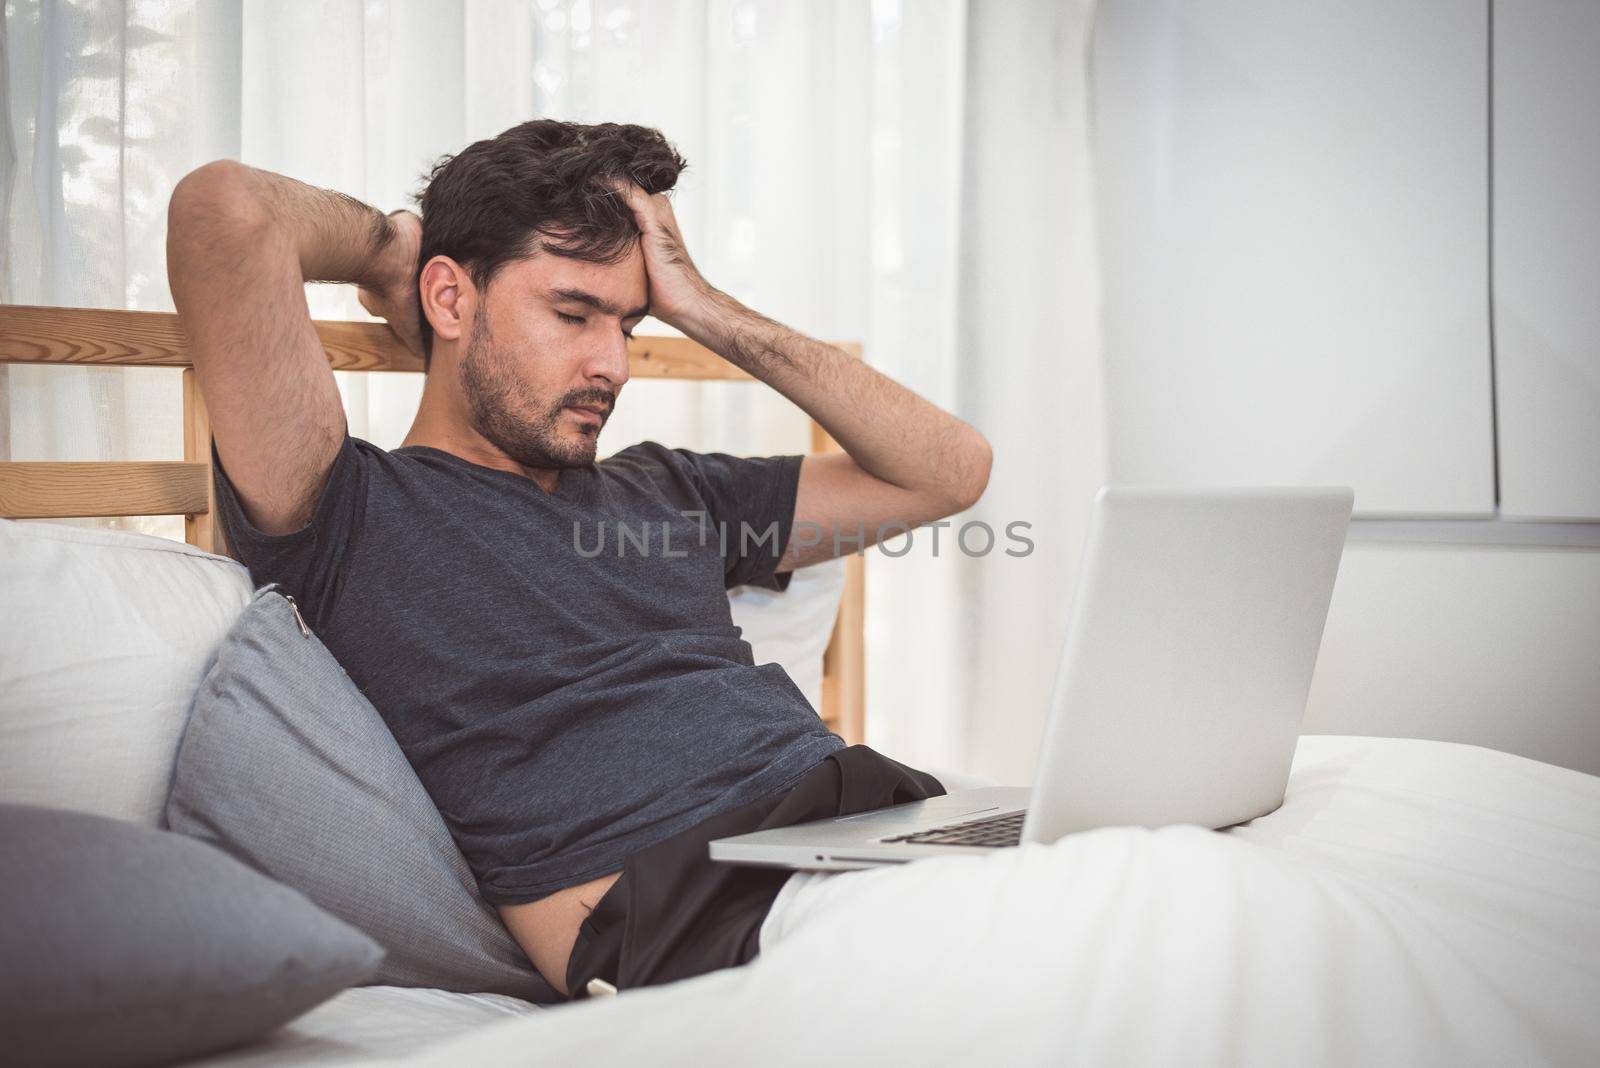 Man stressed out from work with laptop in bedroom. Technology and lifestyle concept. Social issues and problem. Healthcare and Office syndrome. Economic downturn and Critical deadline crisis theme. by MiniStocker